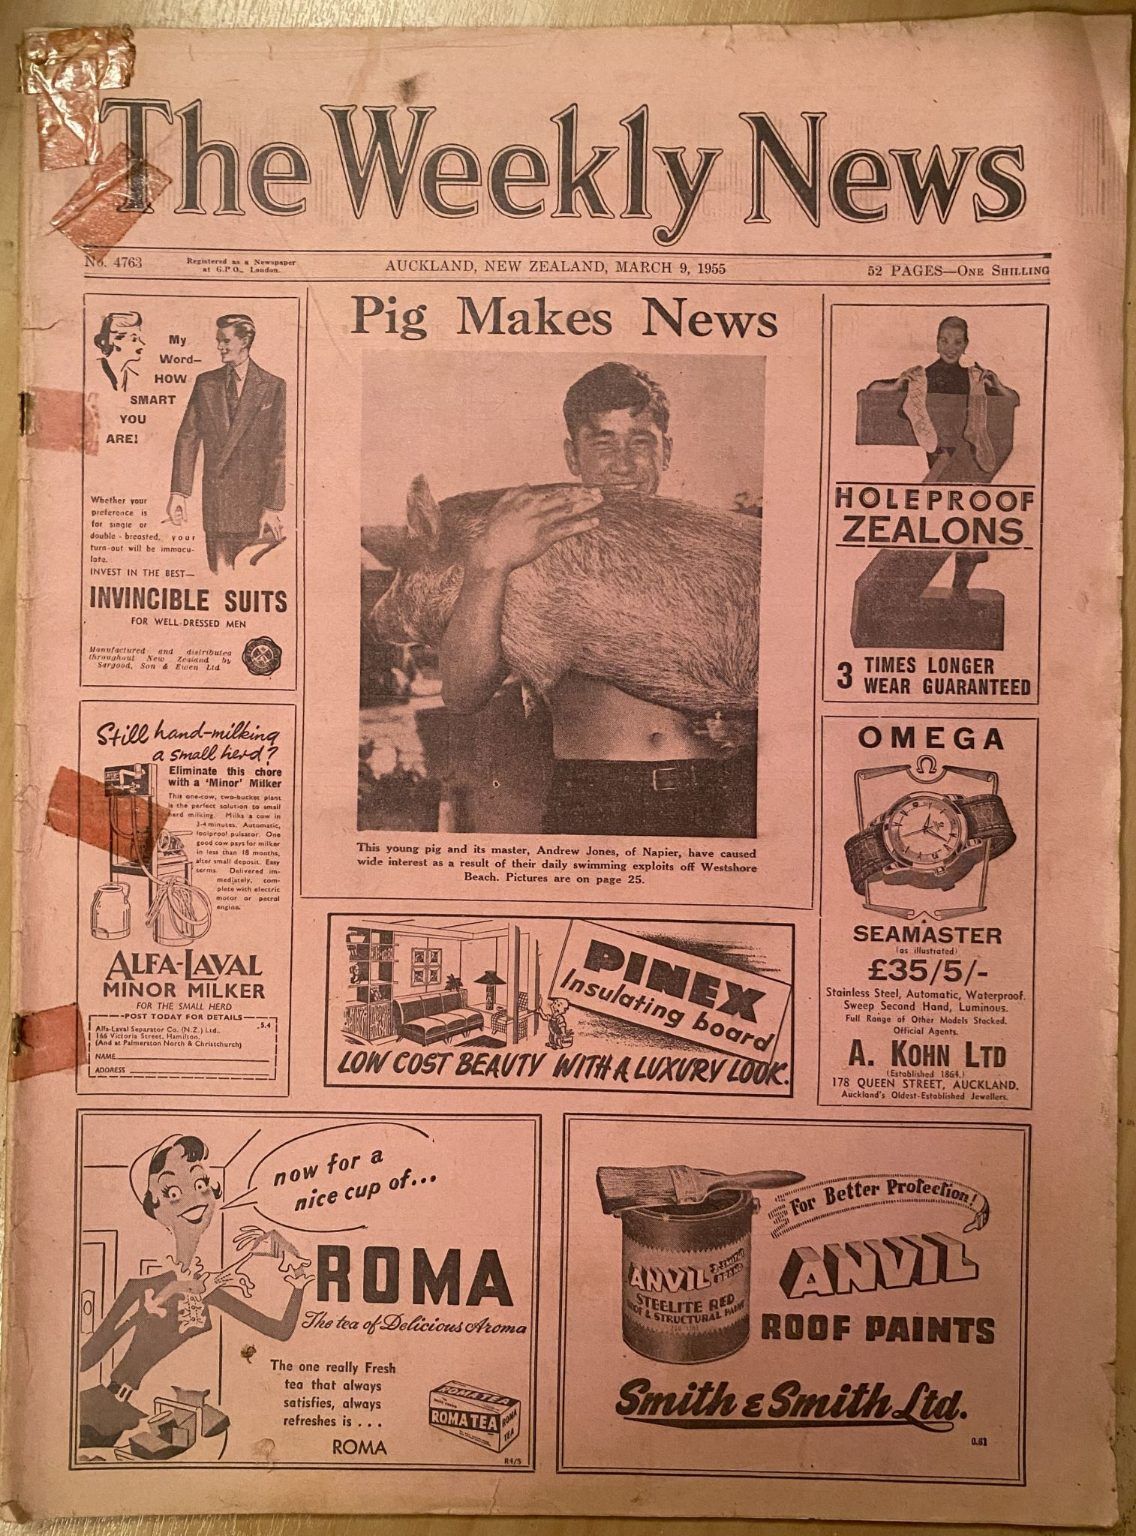 OLD NEWSPAPER: The Weekly News - No. 4763, 9 March 1955